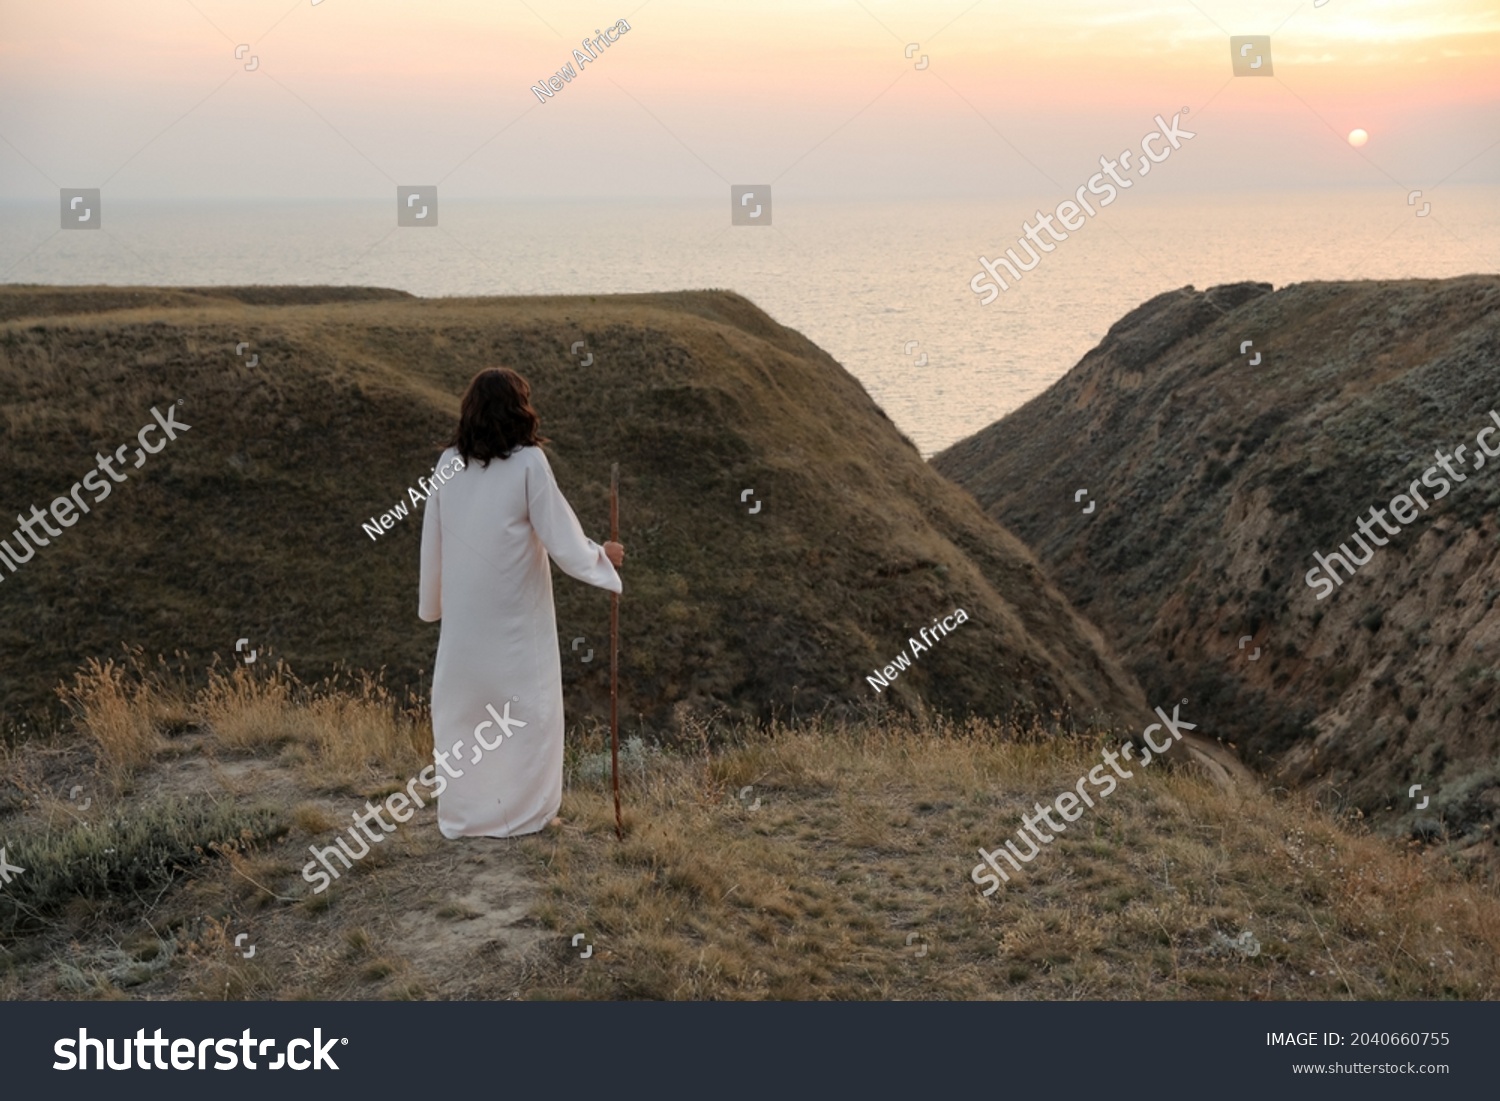 Jesus Christ on hills at sunset, back view. Space for text #2040660755